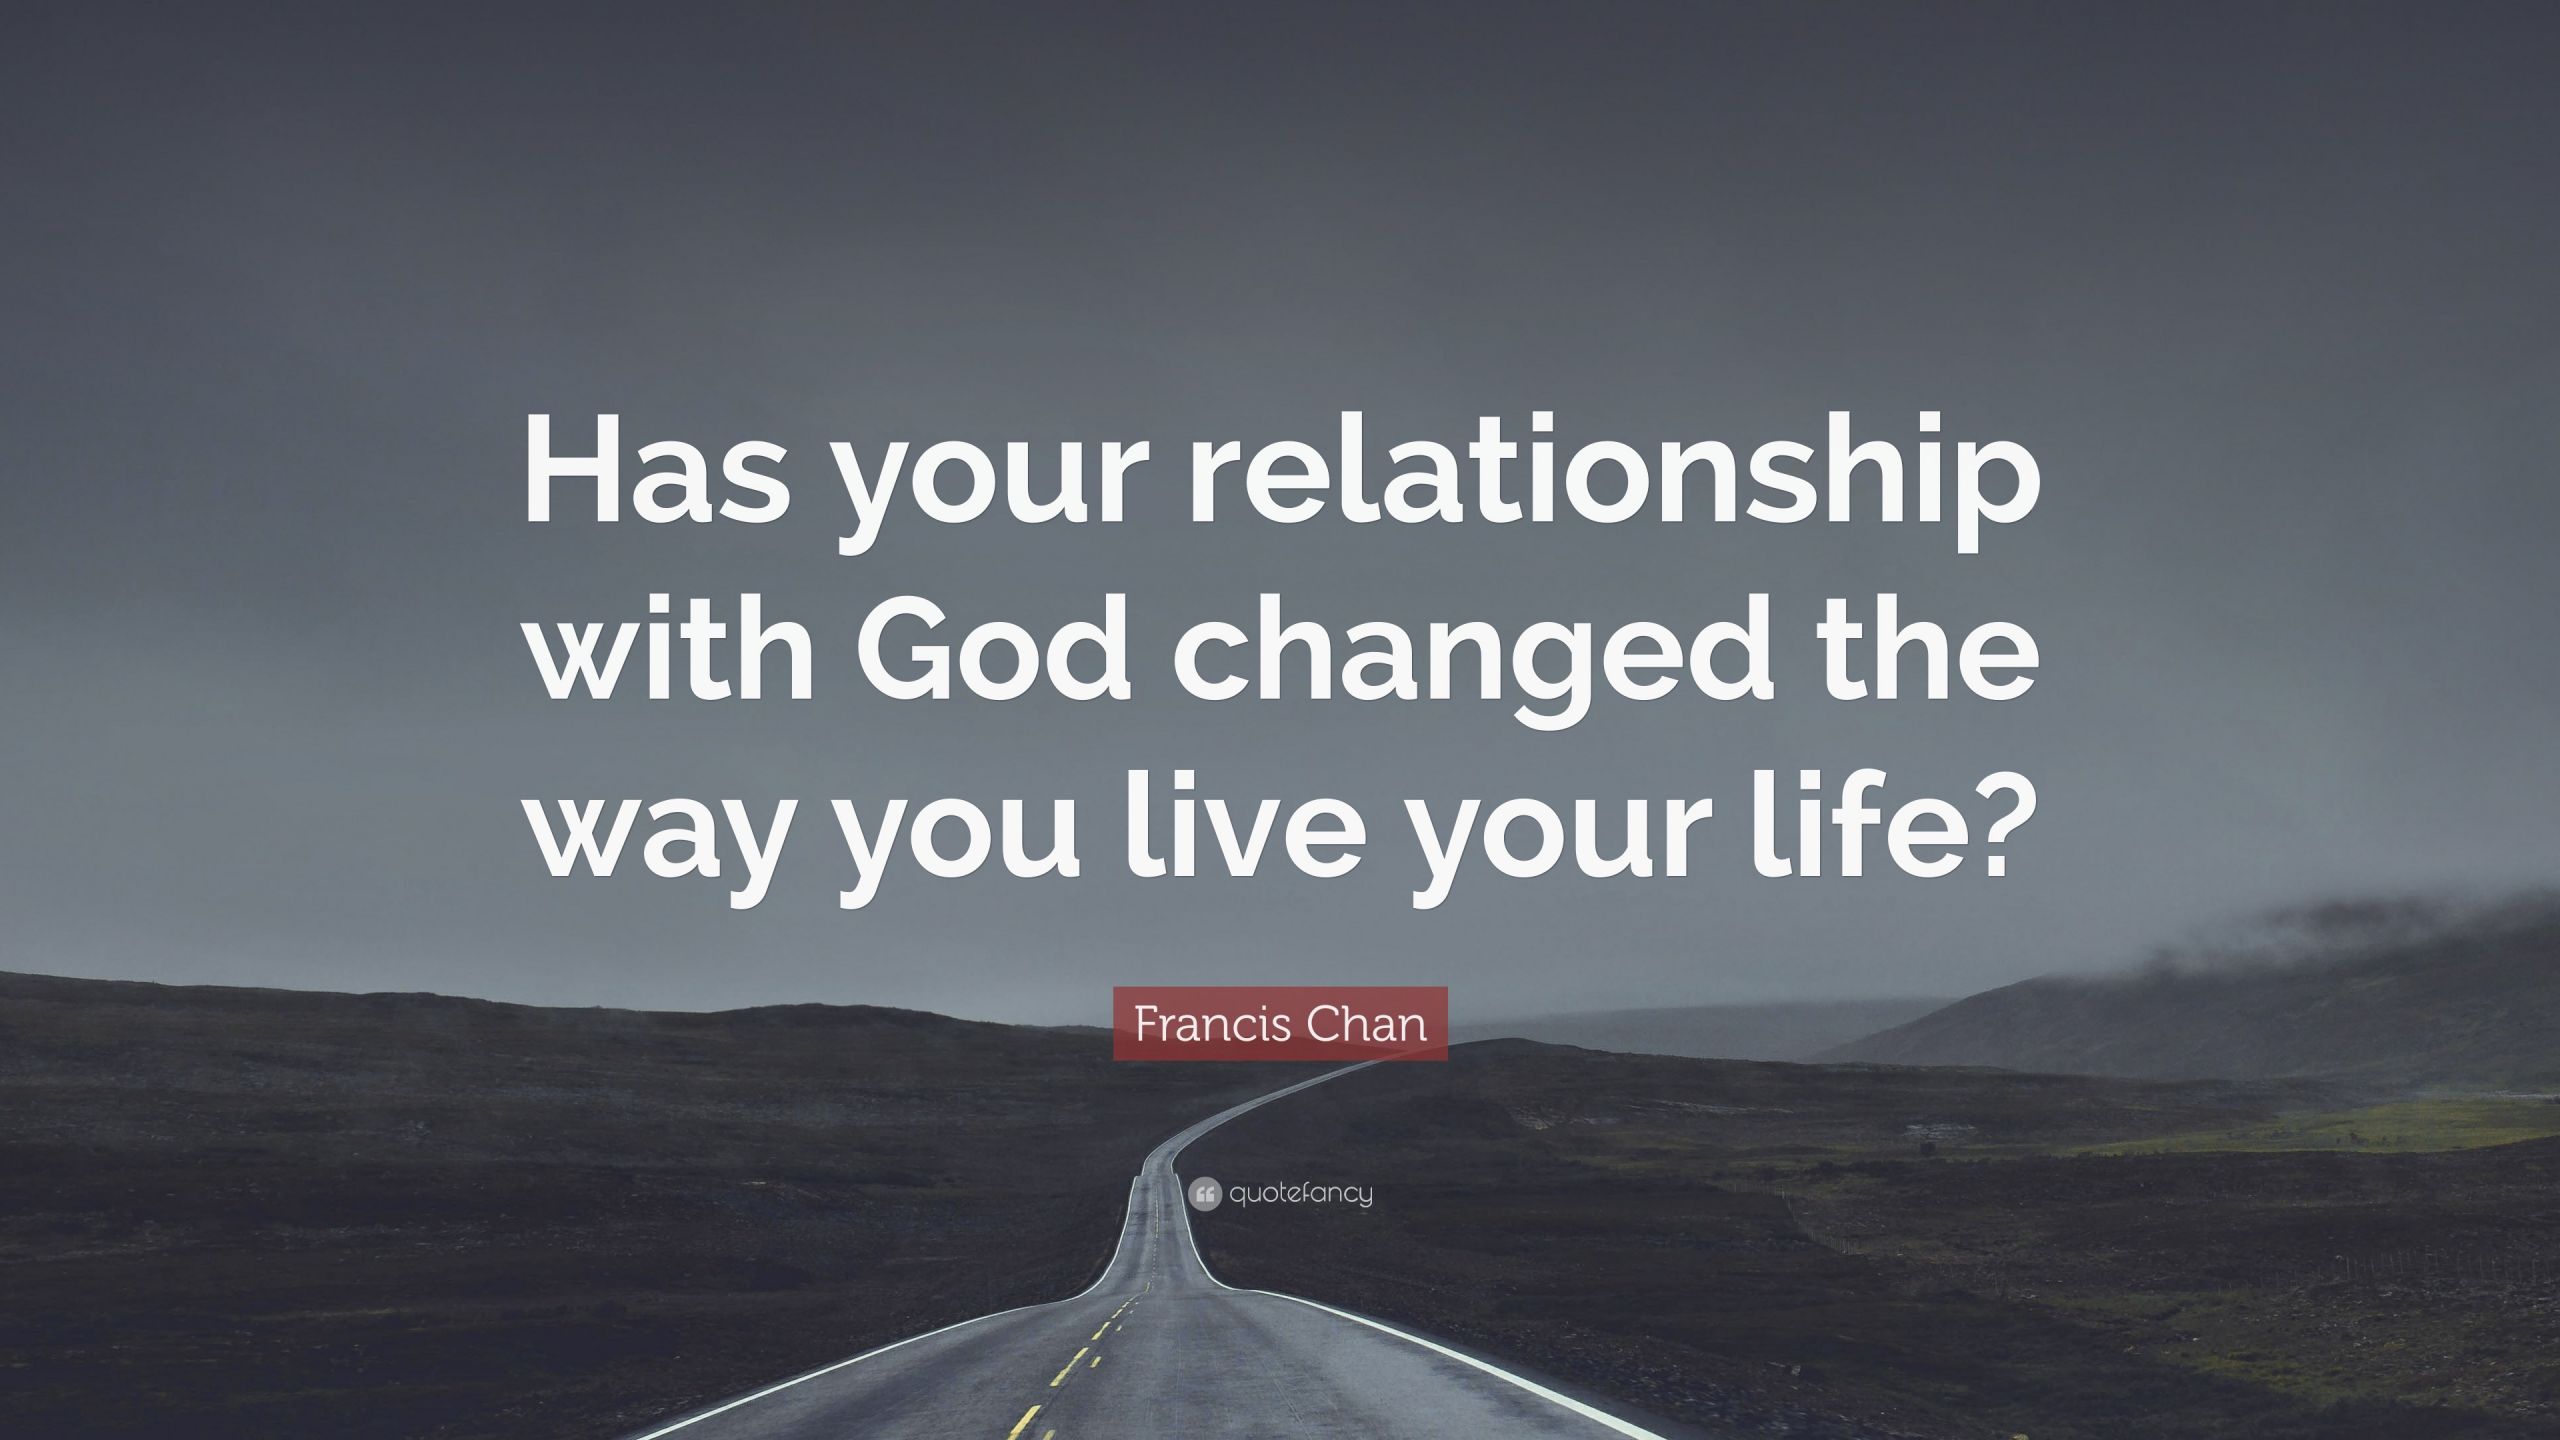 Relationships With God Quotes
 Francis Chan Quotes 100 wallpapers Quotefancy